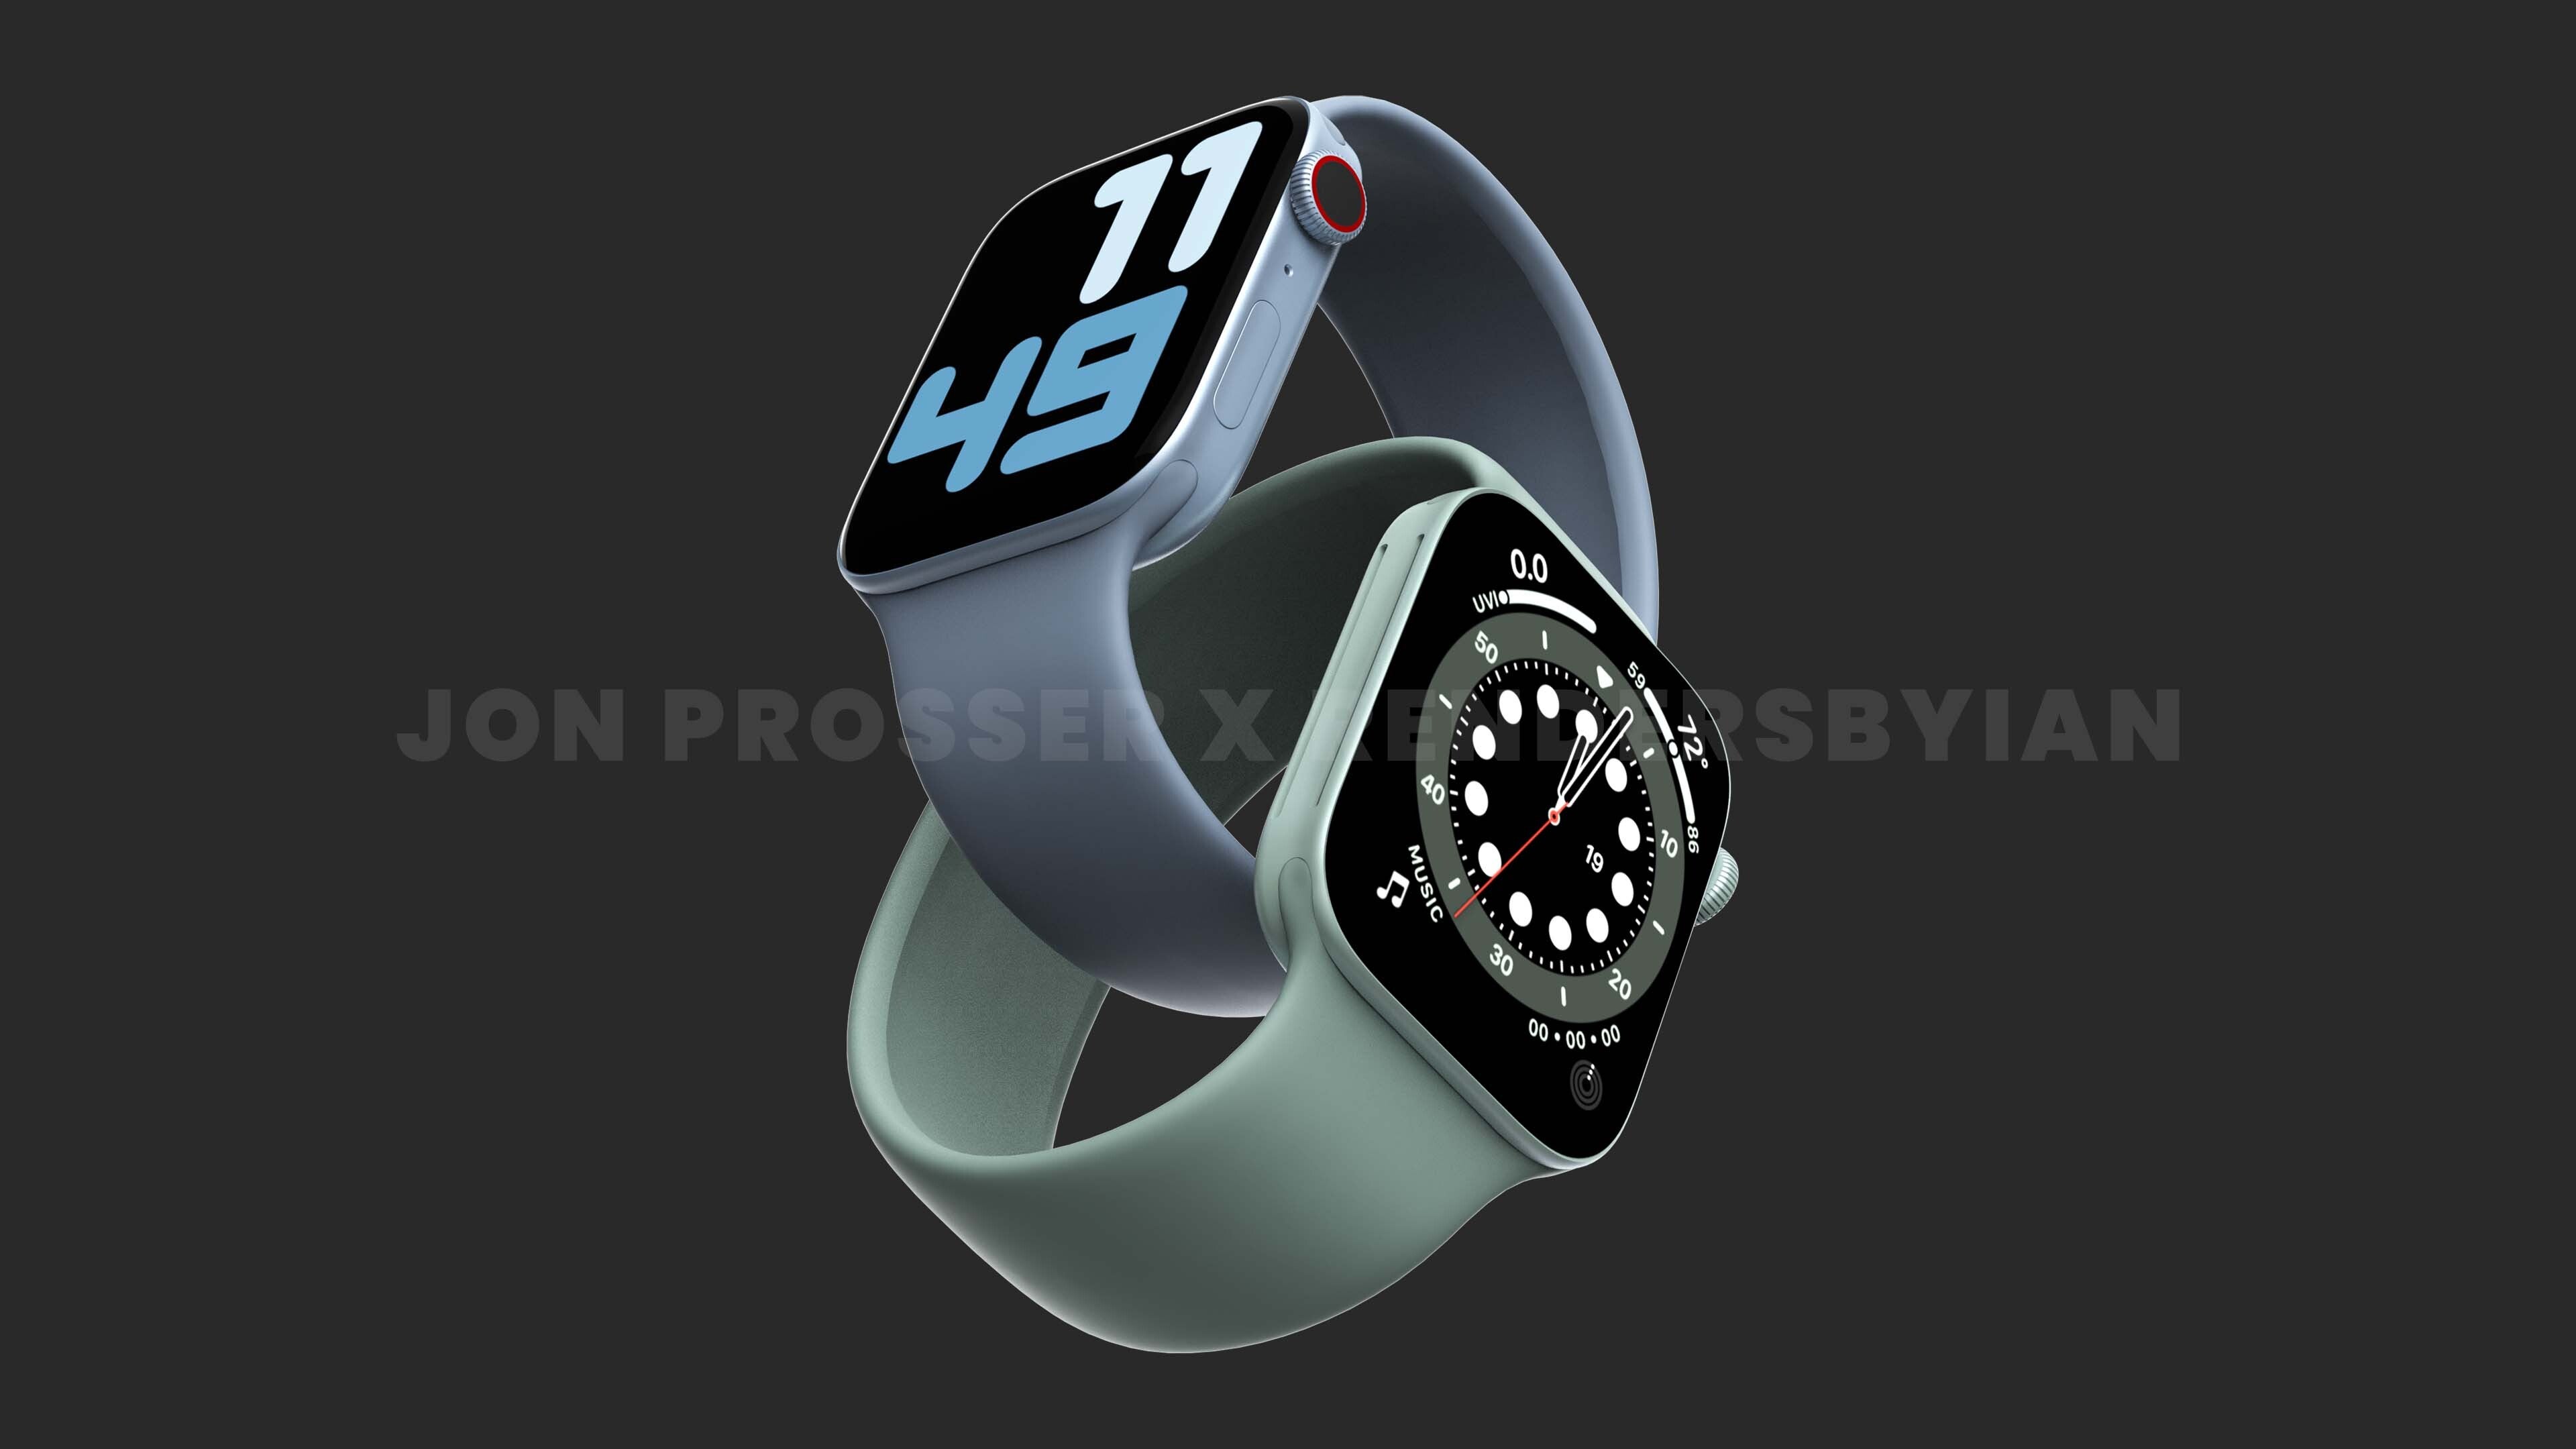 Leaked Apple Watch Series 7 renders, which show a flat design, reminiscent of... well - all recent Apple products. - Apple's masterplan to replace your wallet, documents, and keys with Apple Watch